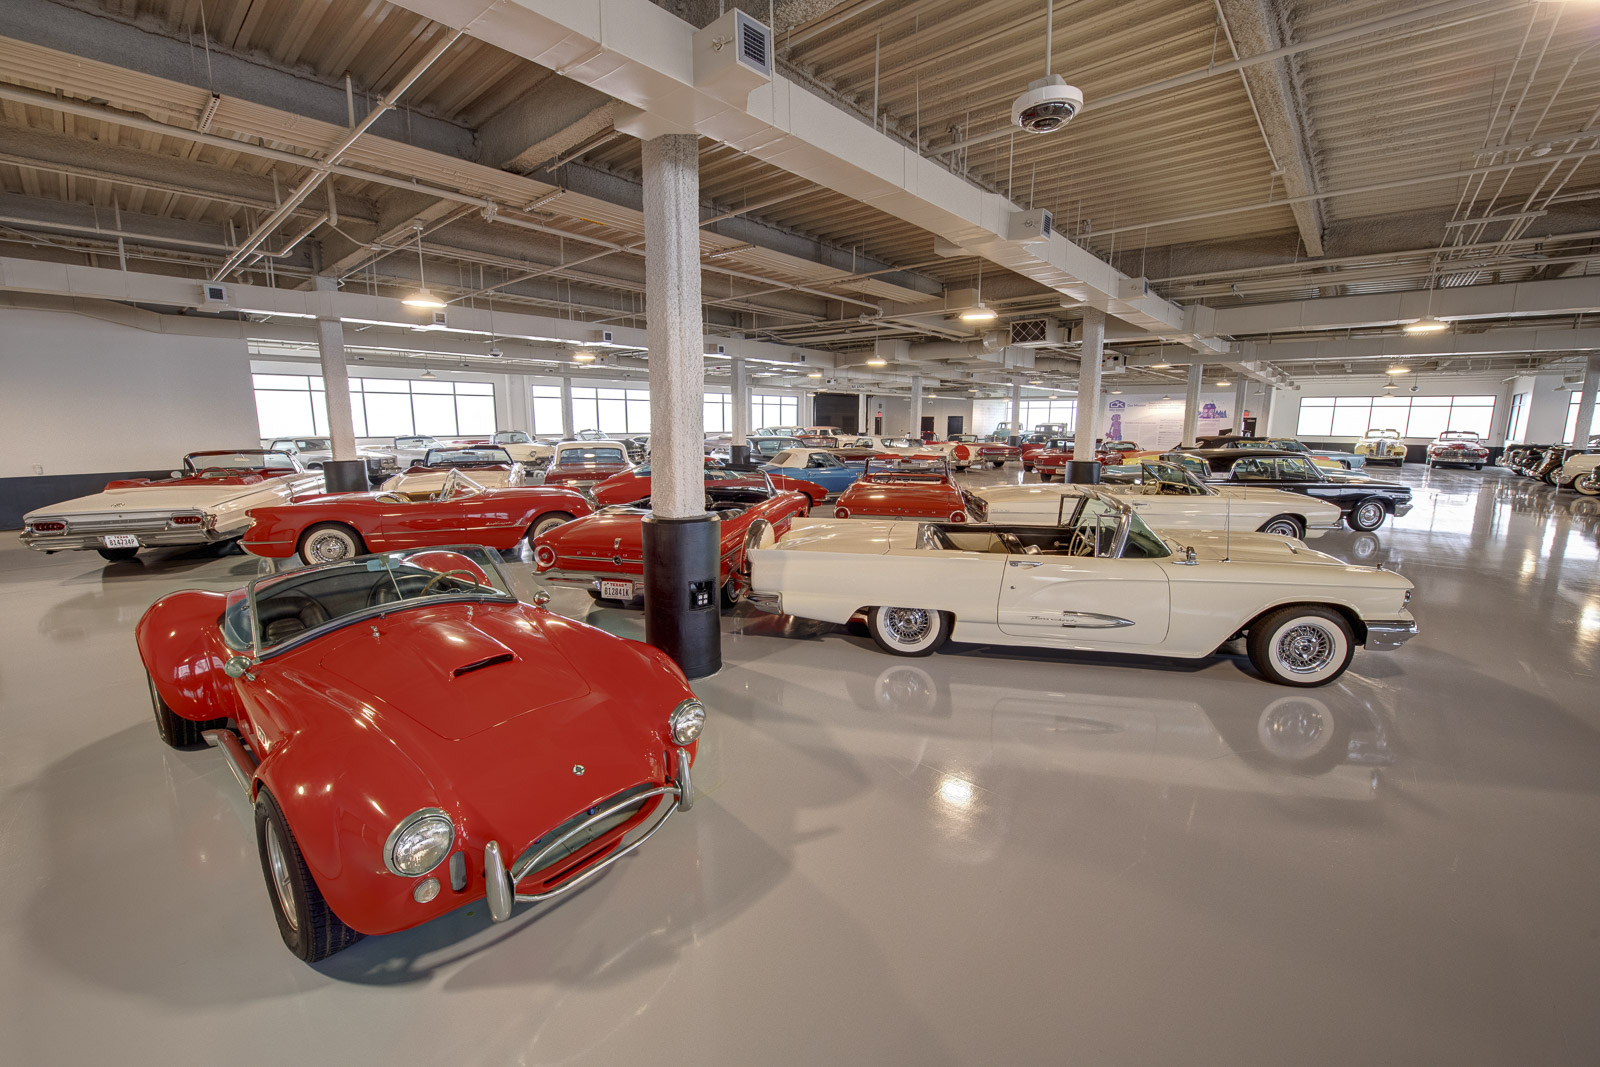 Many classic cars are parked in a large building.